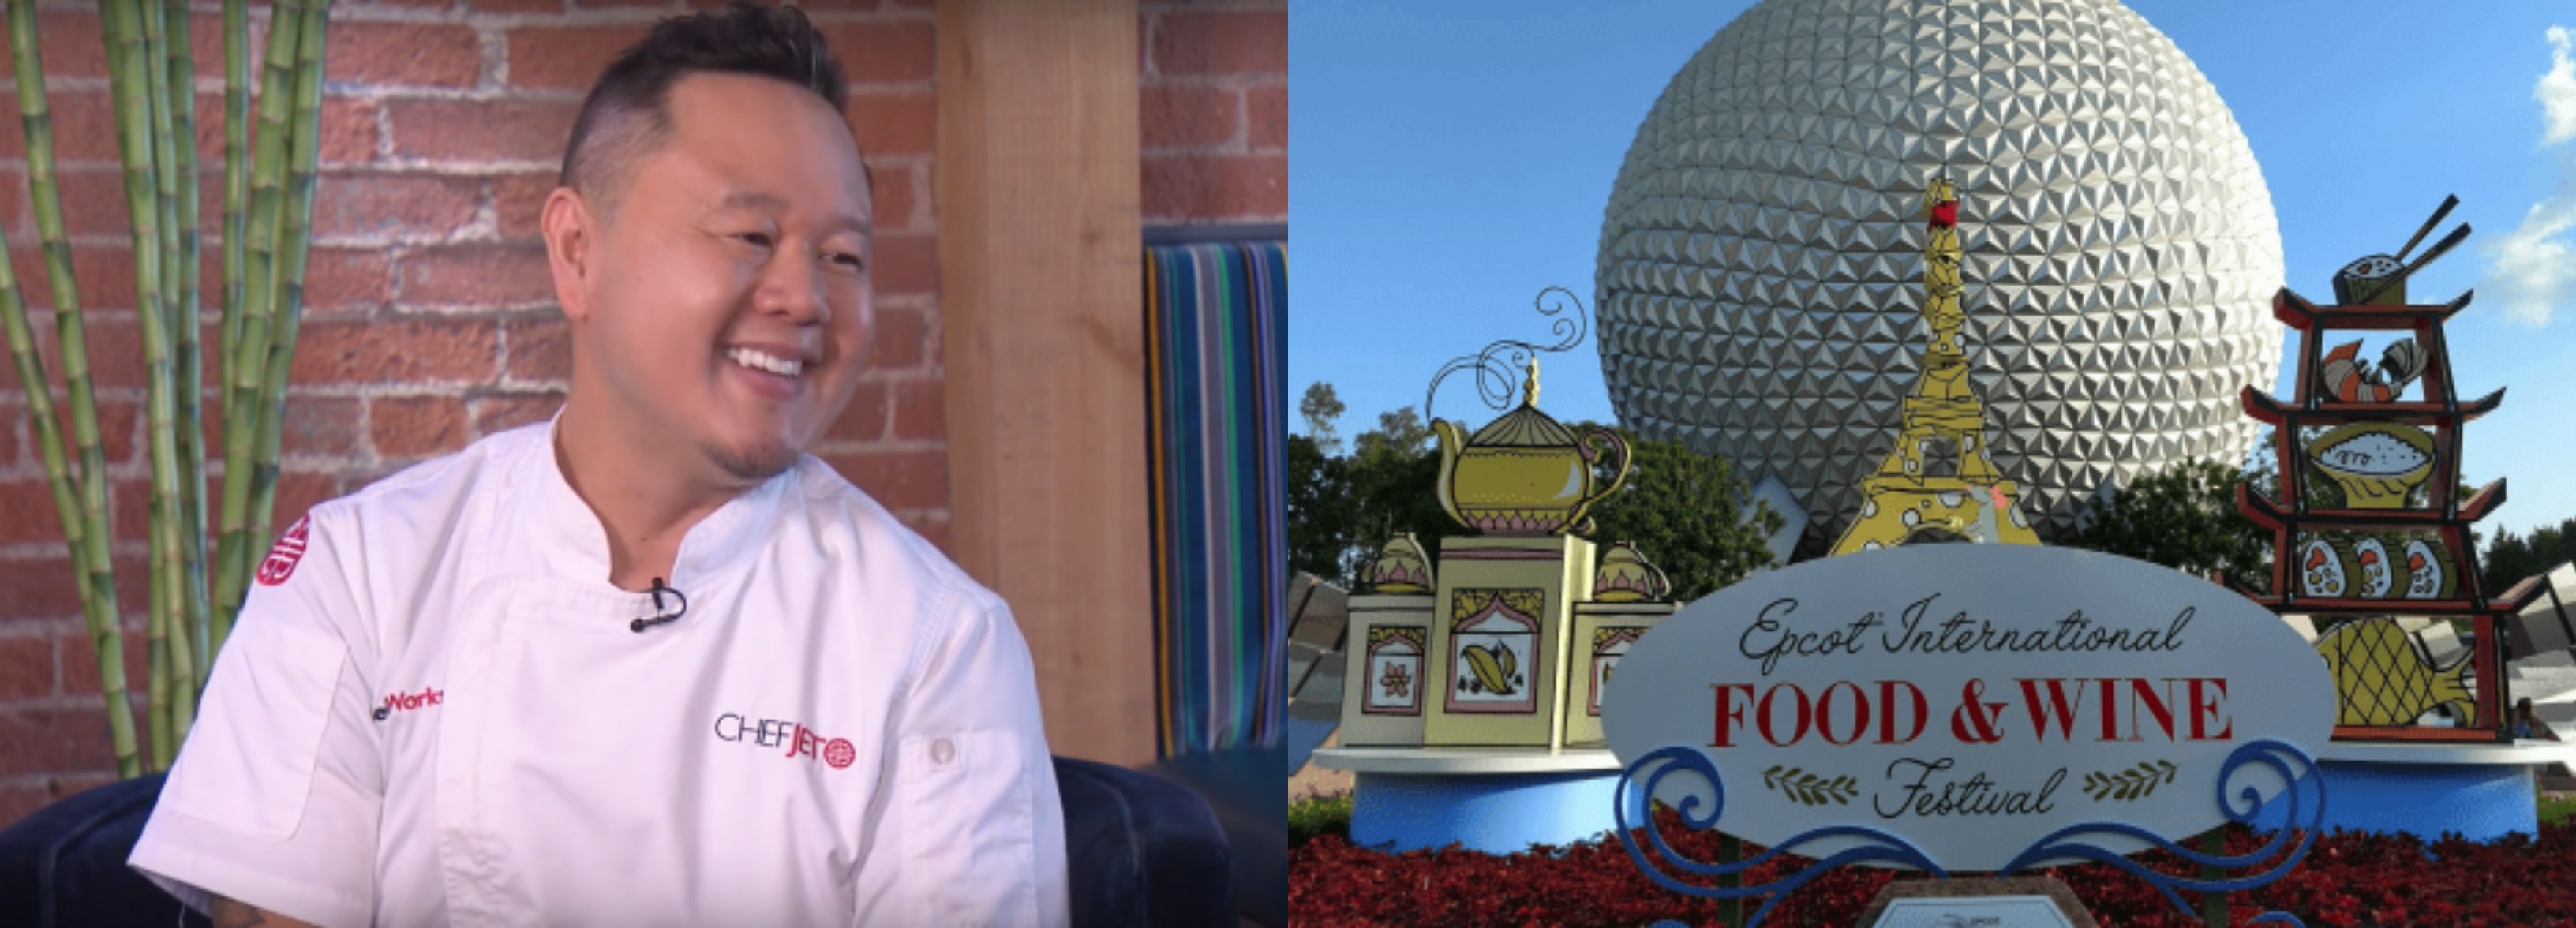 Chef Jet Showcases Asian Cuisine at the Epcot Food & Wine Festival